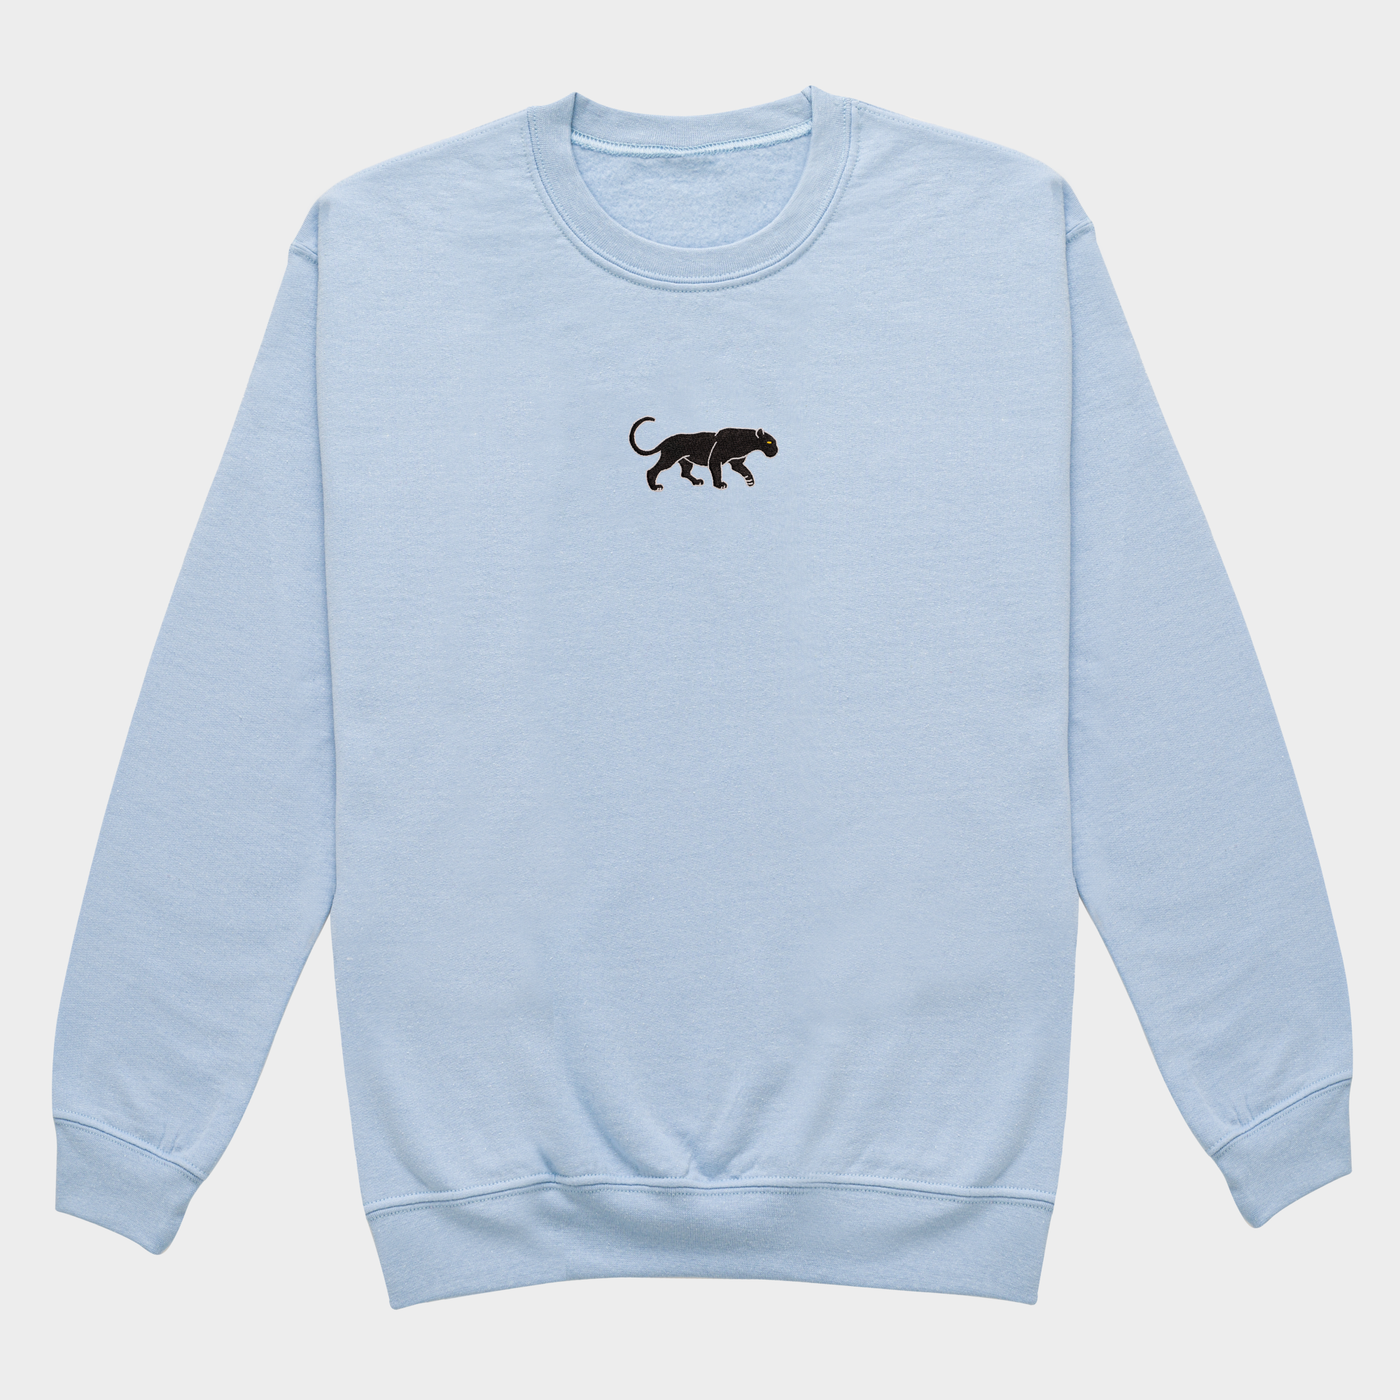 Bobby's Planet Women's Embroidered Black Jaguar Sweatshirt from South American Amazon Animals Collection in Light Blue Color#color_light-blue